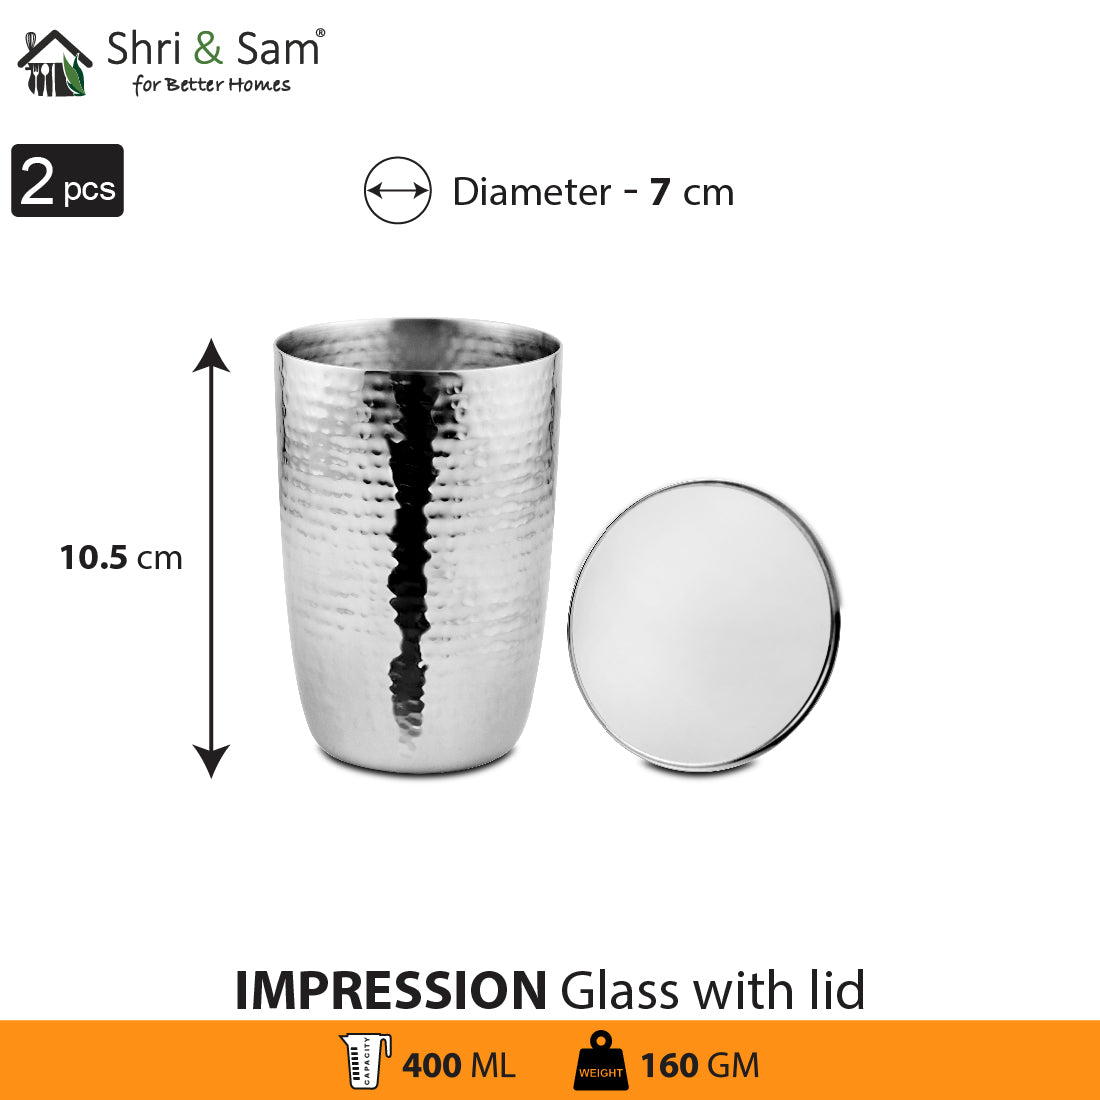 Stainless Steel 2 PCS Hammered Glass with SS Lid Impression